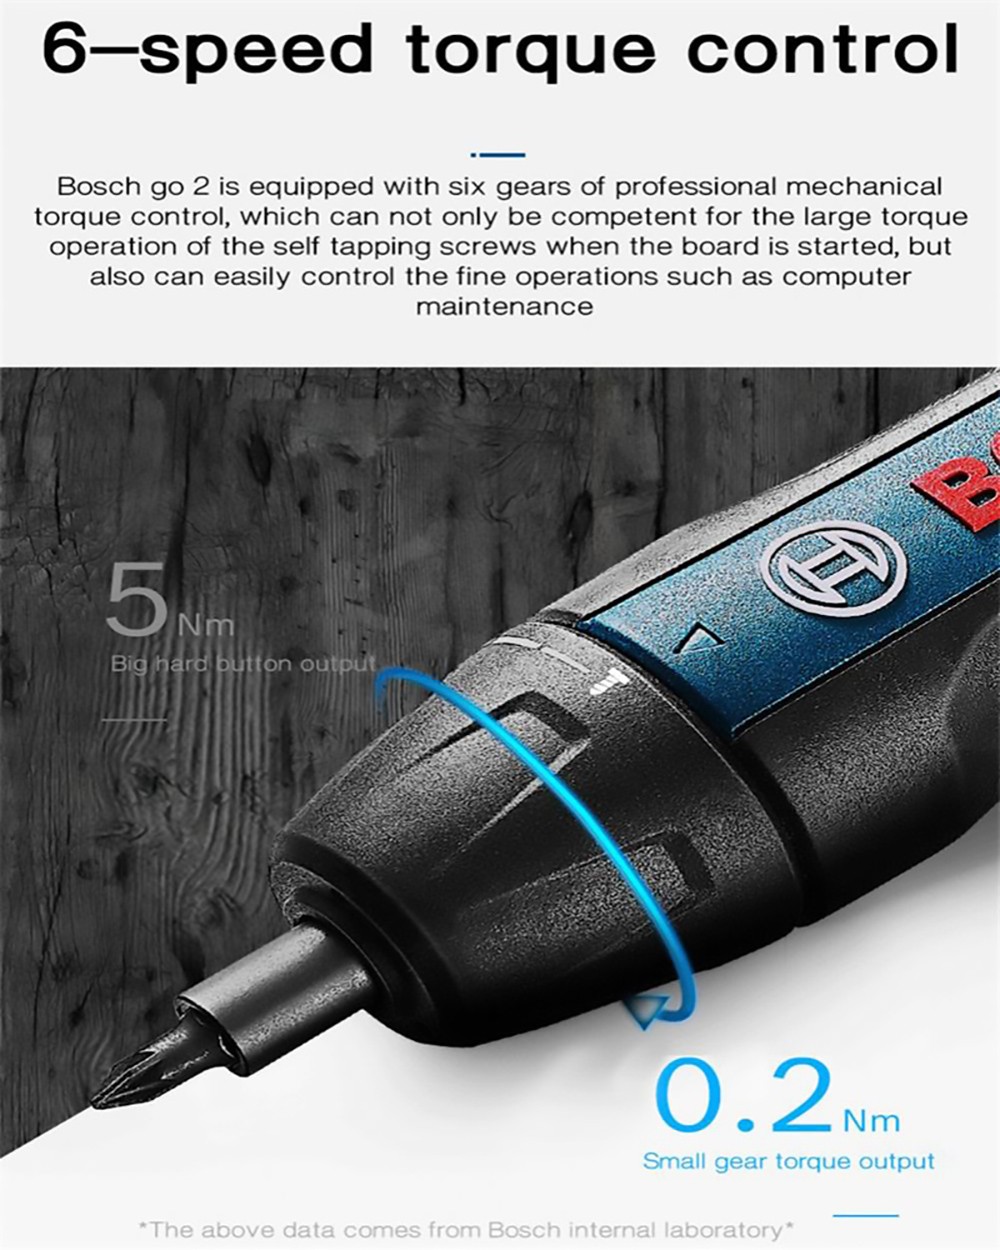 BOSCH GO2 Electric Screwdriver 3.6V 1.5Ah Cordless Rechargeable Hand Drill Power Tools, 0.2-5Nm 6-Speed Torque Adjustment, Smart Stop, Electronic Brake